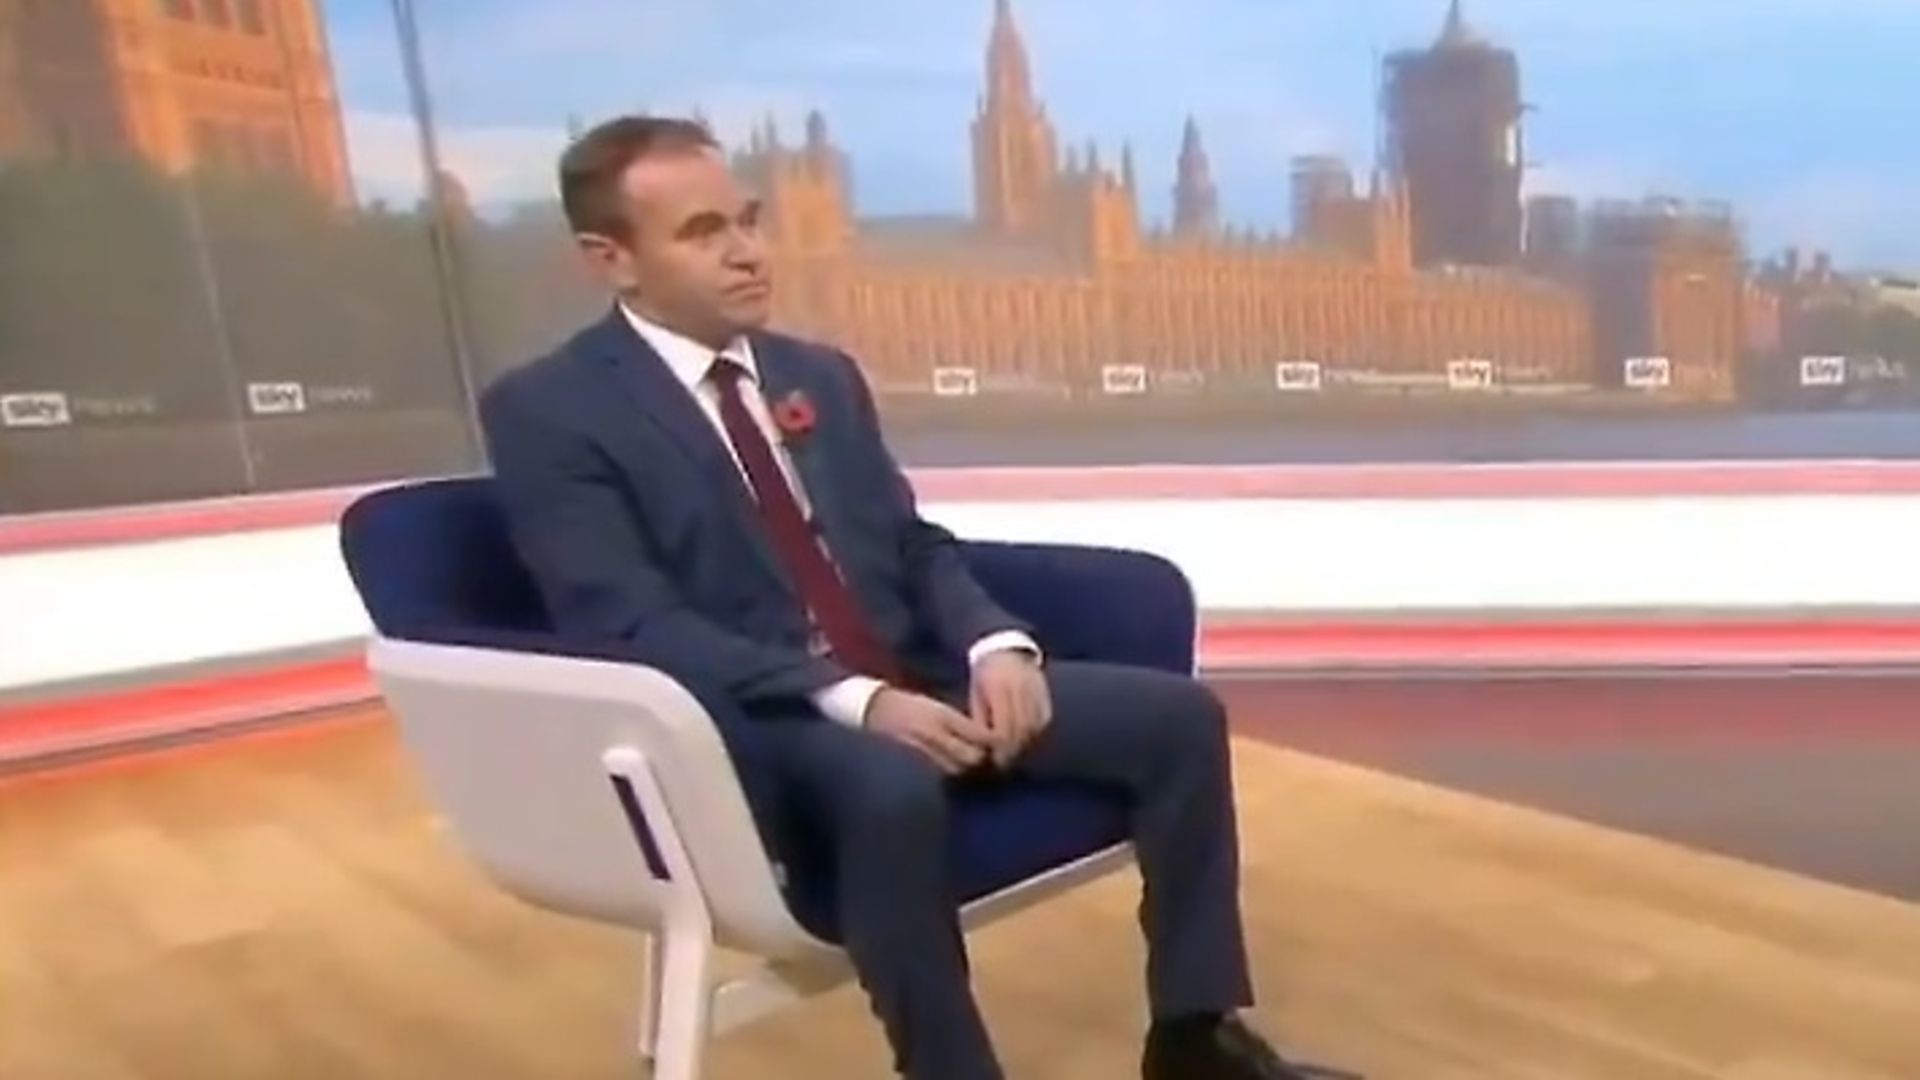 George Eustice appears on Sky News to answer questions on Joe Biden's win - Credit: Sky News